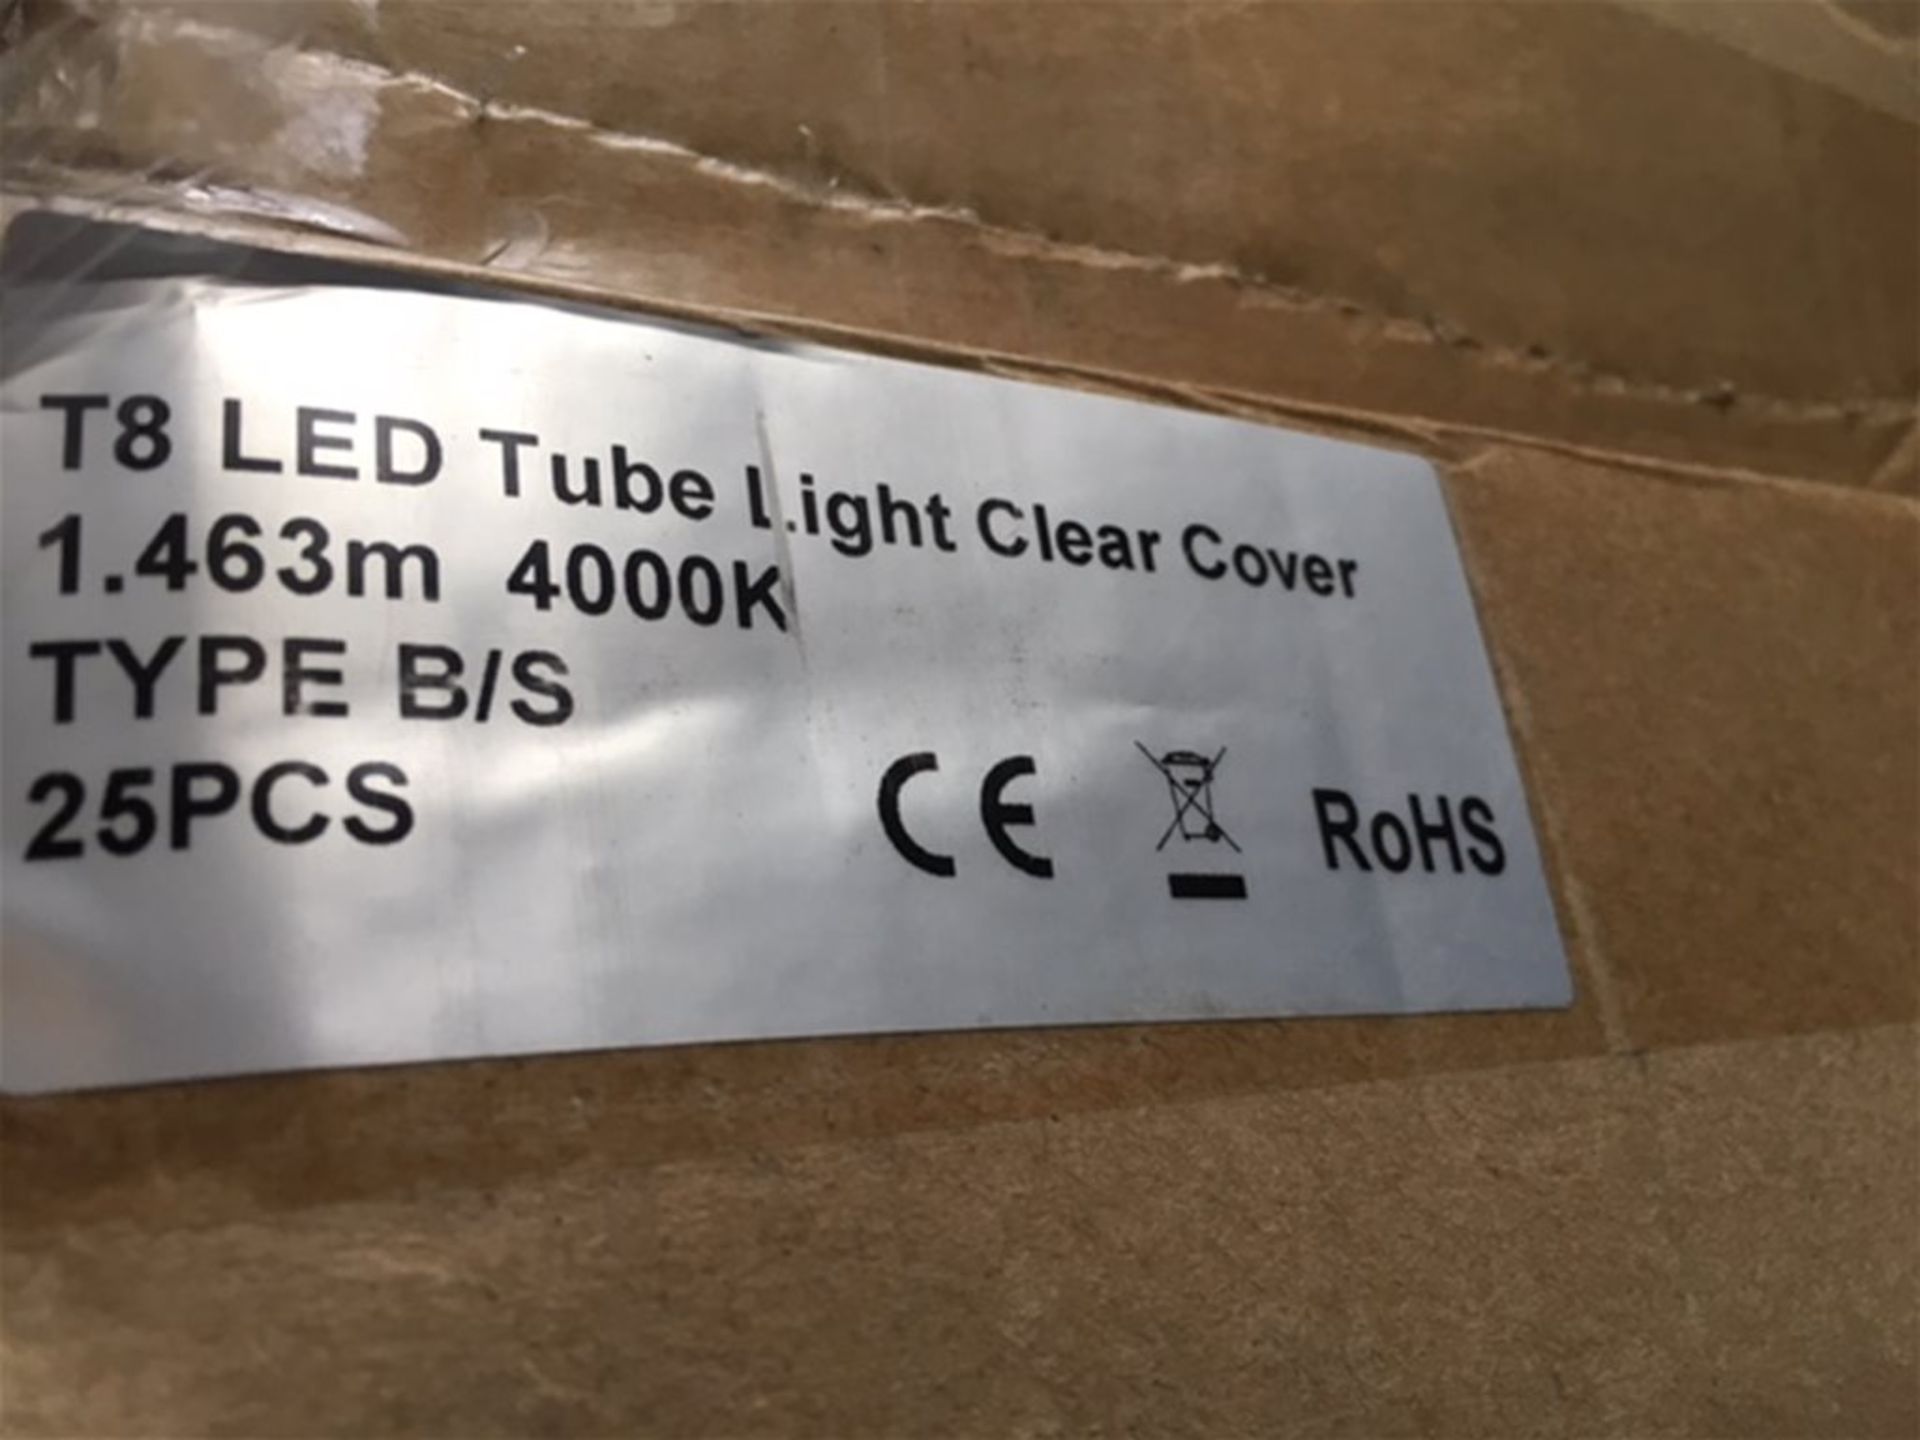 NEW 200x Led Tube Lights New Boxed With Built In Driver - Image 2 of 7